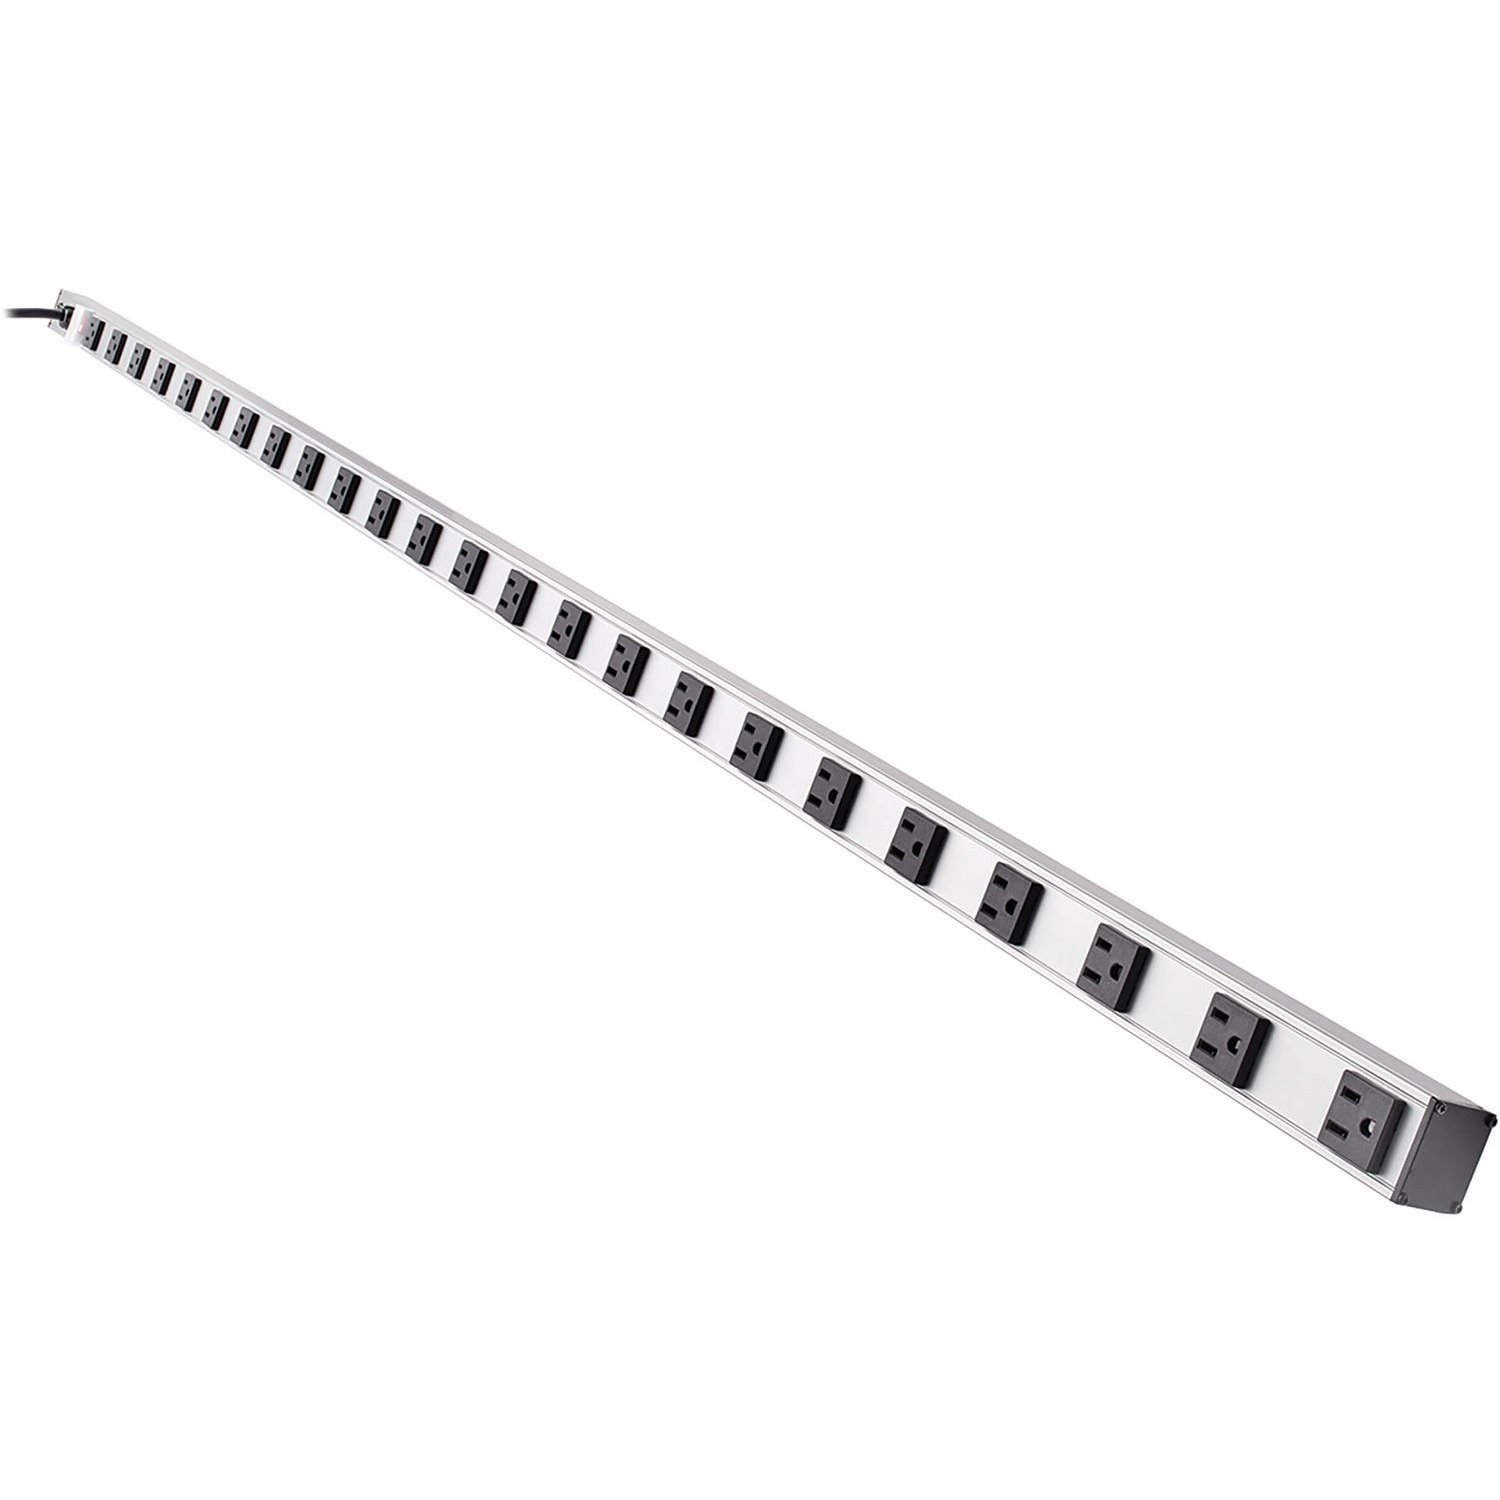 Tripp Lite by Eaton 24-Outlet Vertical Power Strip, 120V, 15A, 5-15P, 15 ft. (4.57 m) Cord, 72 in.